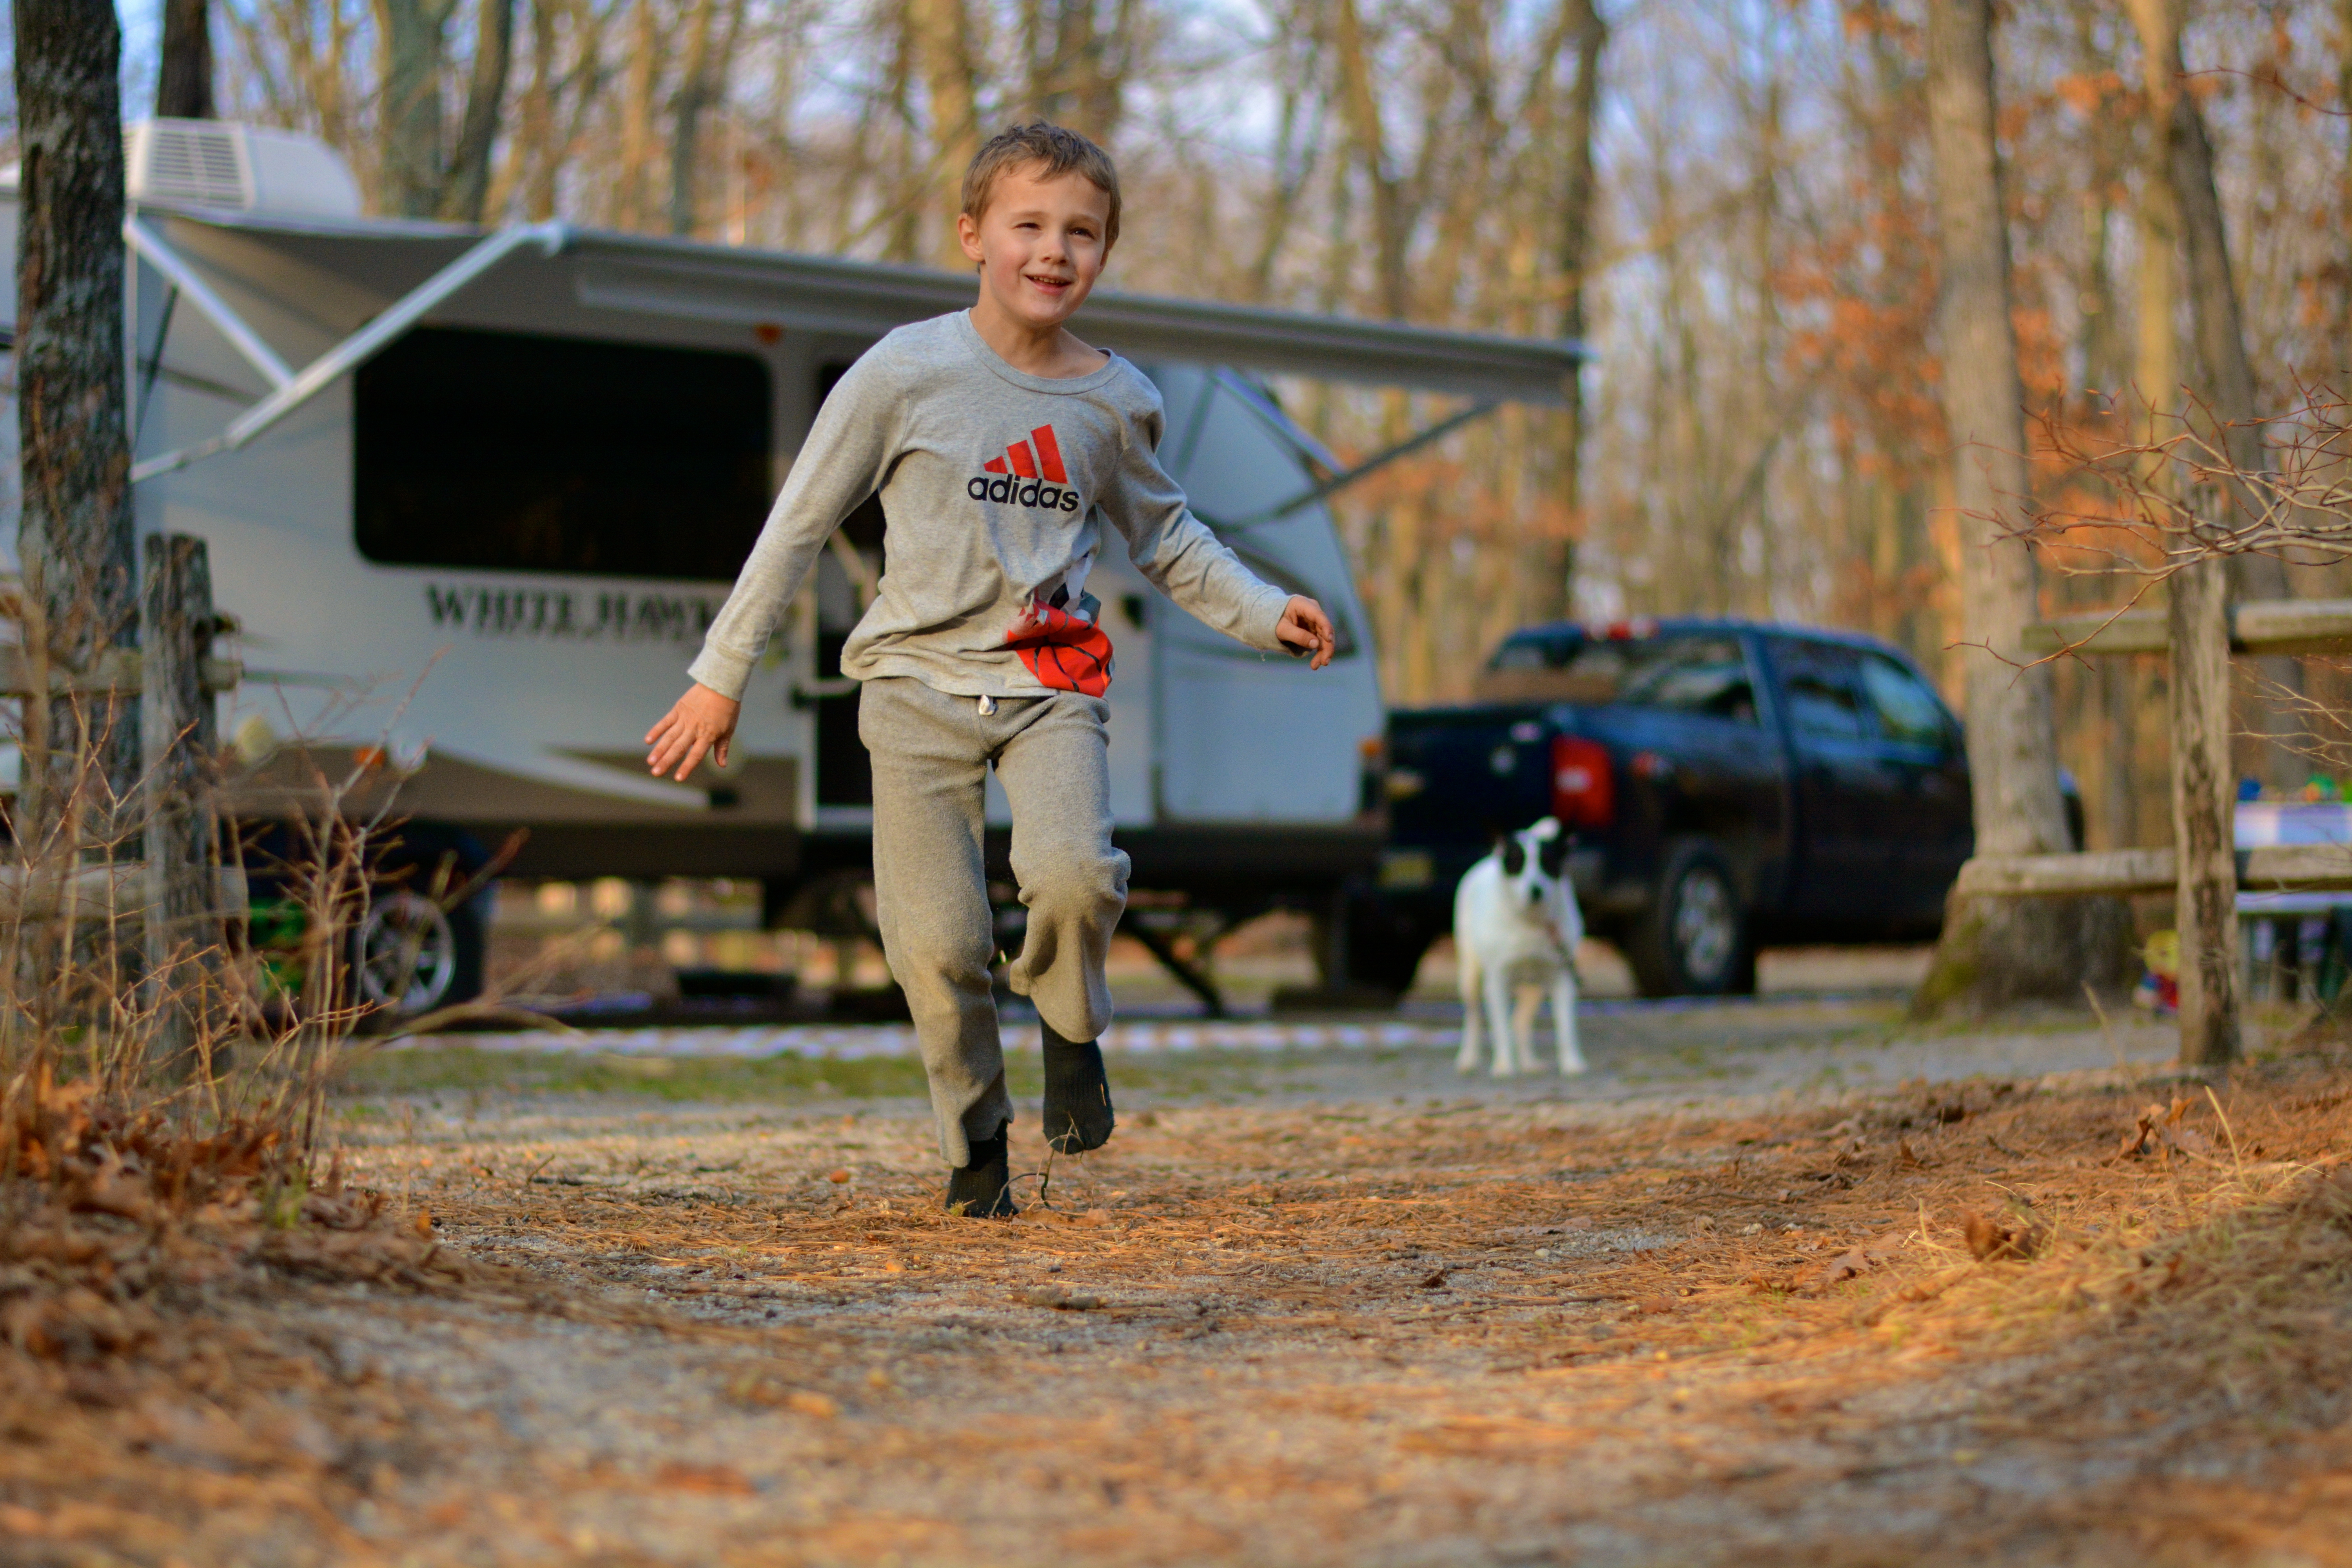 Camping in Cooler Temperatures: Enjoying Autumn in Your RV